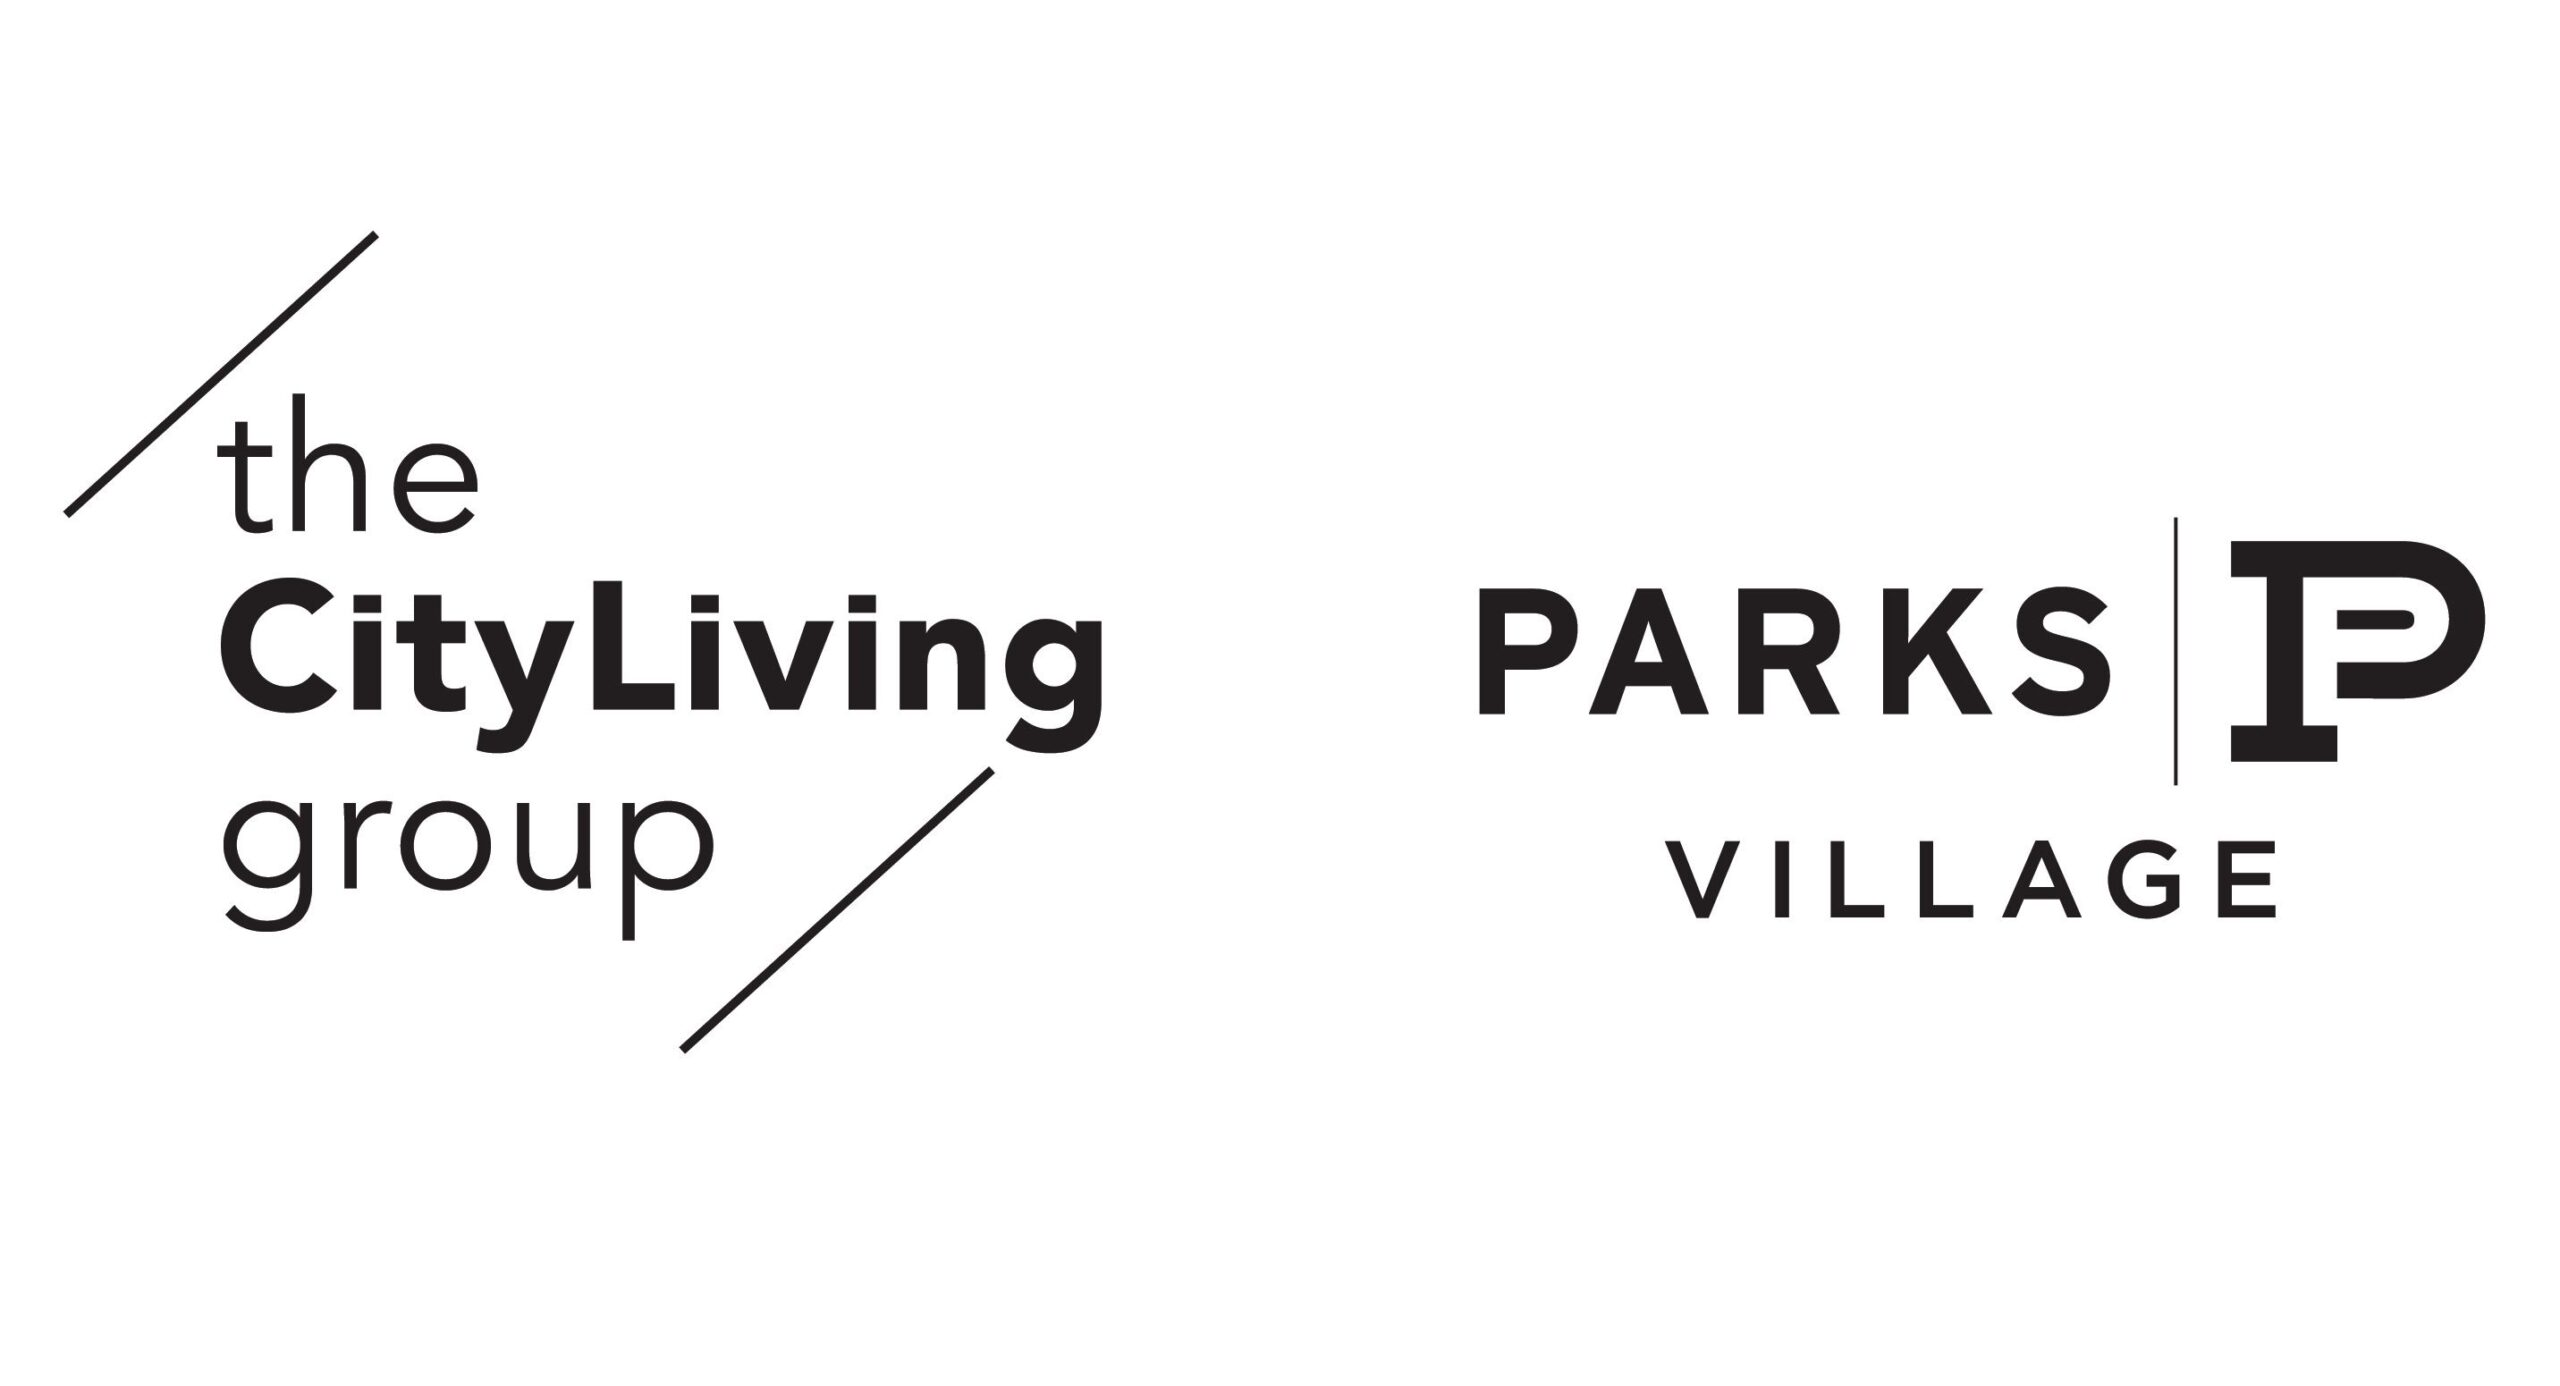 The CityLiving Group at PARKS